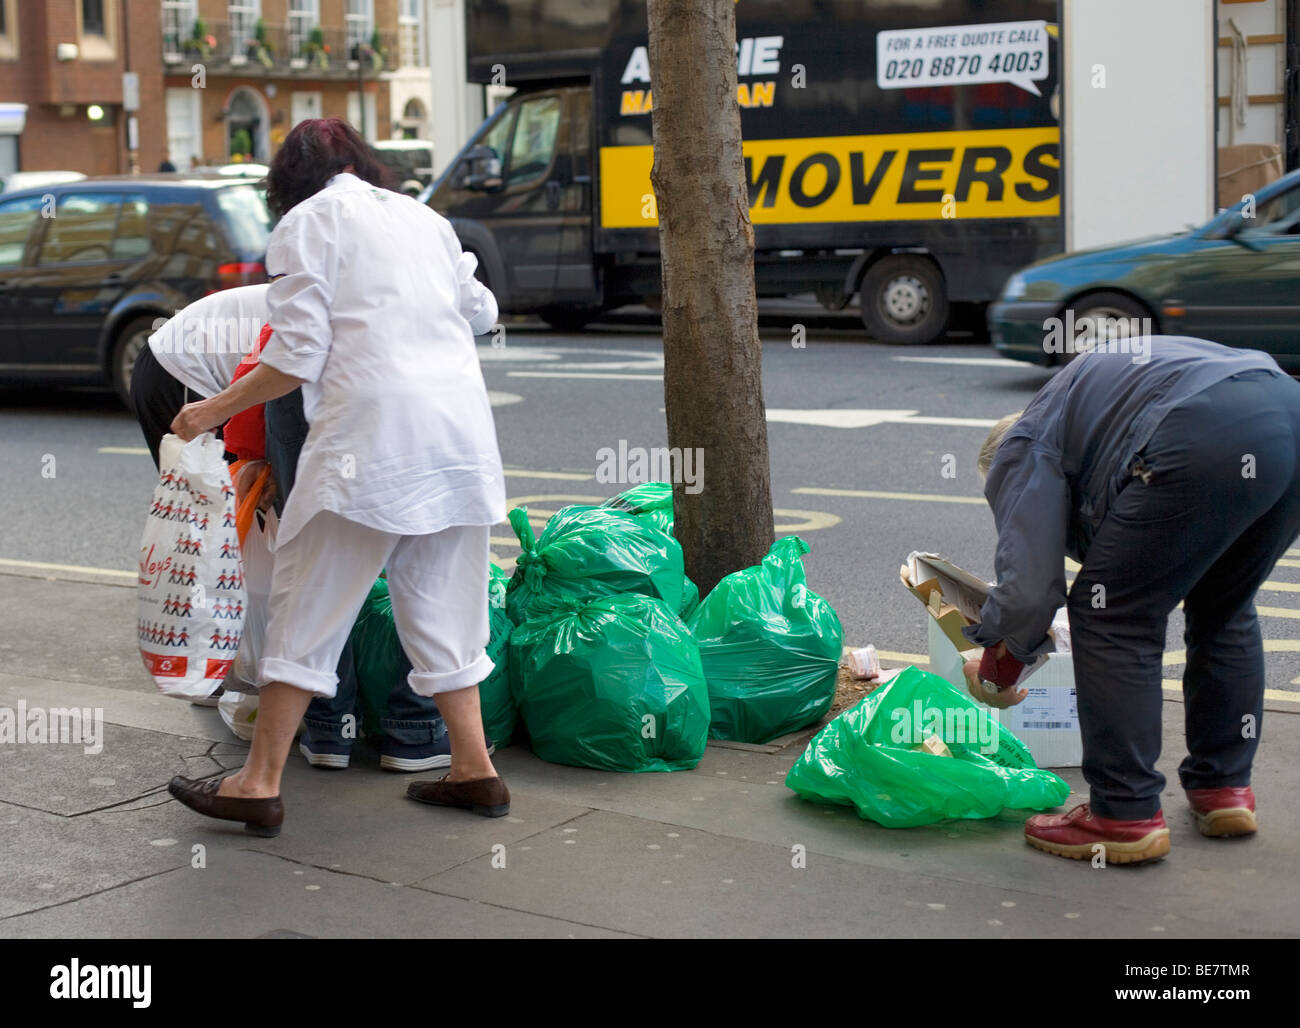 End of day discarded food grab, Baker Street, London, England, UK, Europe Stock Photo